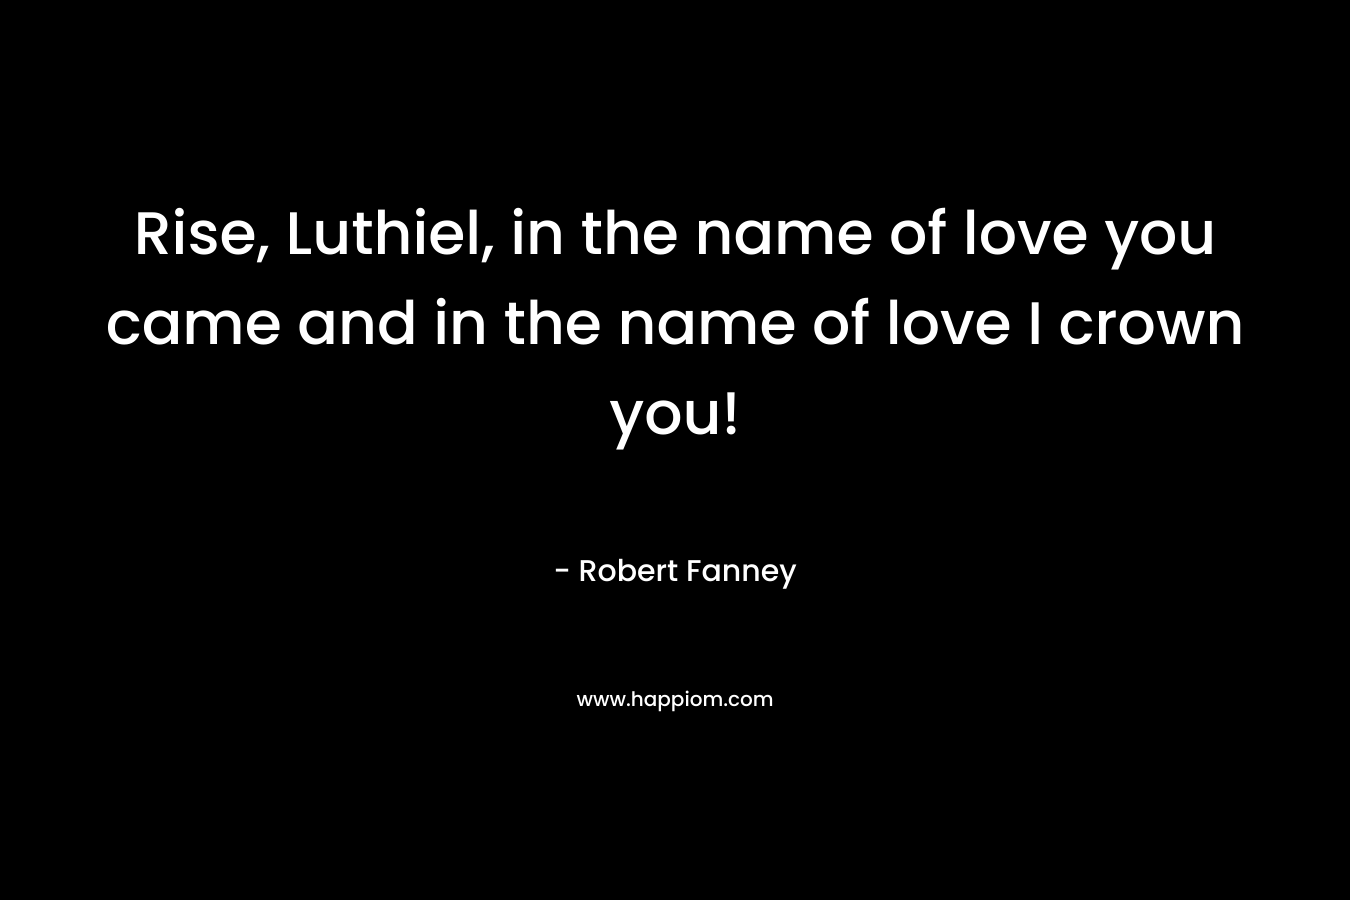 Rise, Luthiel, in the name of love you came and in the name of love I crown you! – Robert Fanney